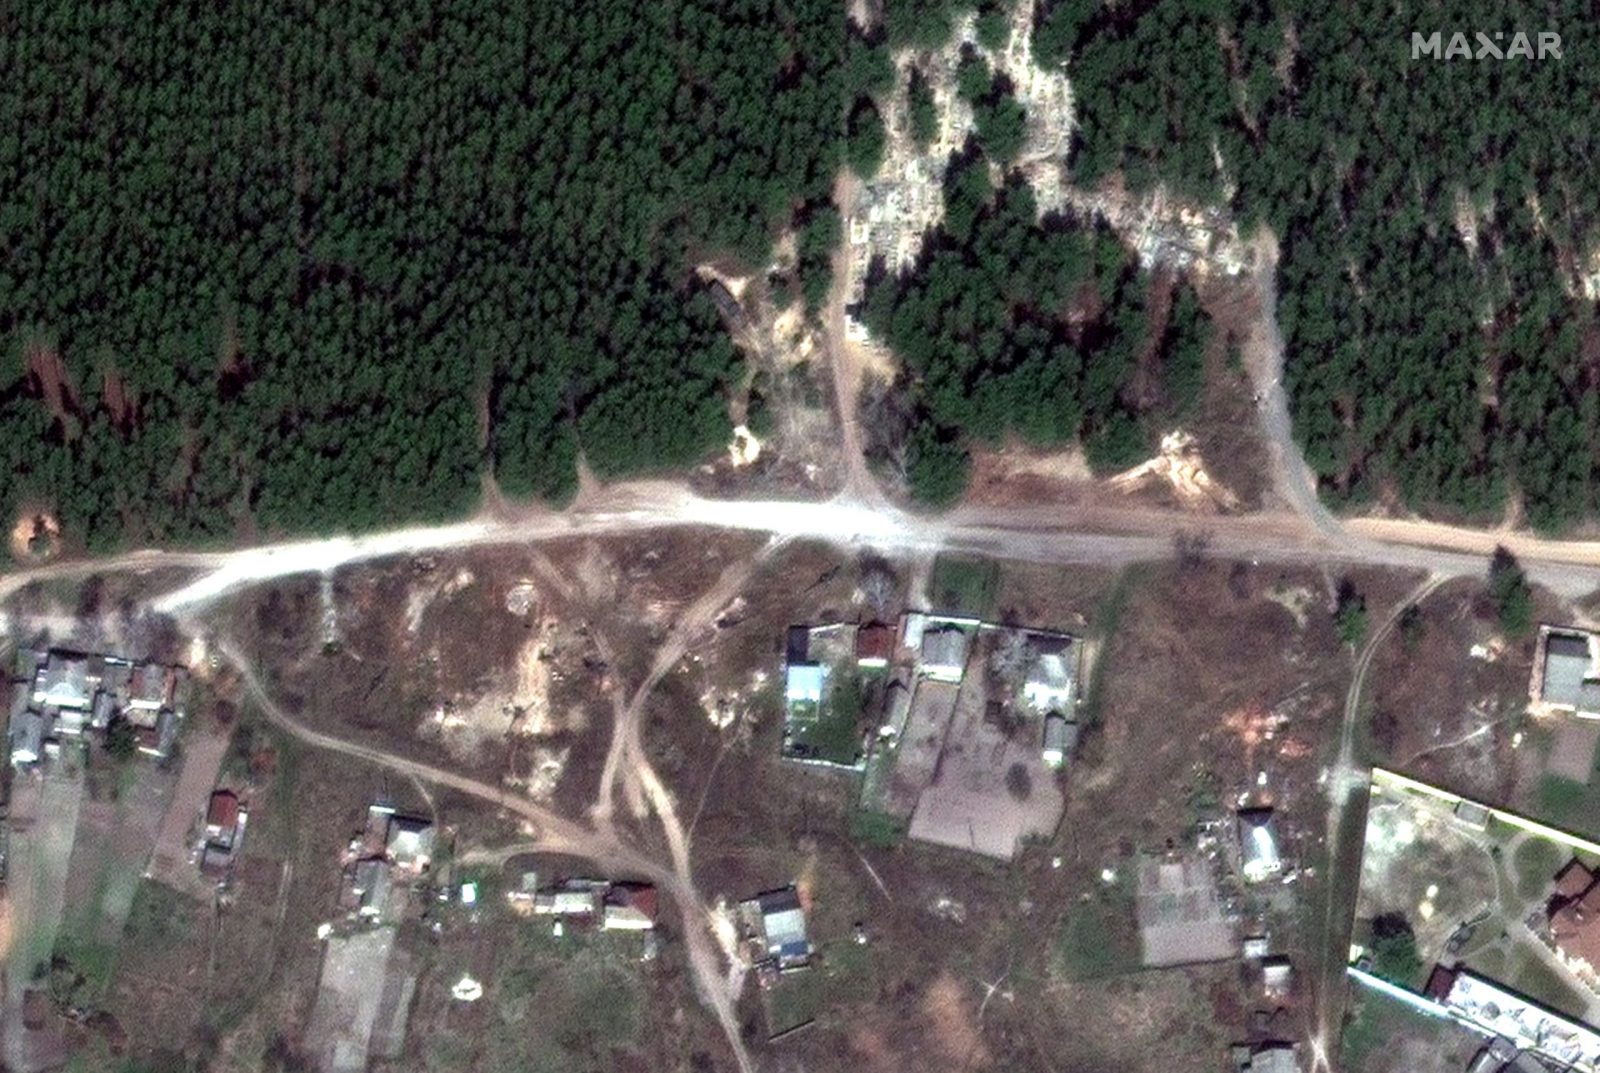 epa10189375 A handout satellite image made available by Maxar Technologies shows artillerty pieces deployed near the entrance to the cemetary in Izyum, Ukraine, 08 April 2022 (issued 17 September 2022). According to statements from Ukraine President Volodymyr Zelensky, bodies found in a mass burial site near Izyum, an area recently taken back from Russian forces, show signs of torture. Governor of Kharkiv Oblast Oleg Synegubov stated that civilians were among the dead, and some of the more than 440 bodies found buried at the site had their hands bound behind their backs.  EPA/MAXAR TECHNOLOGIES HANDOUT -- MANDATORY CREDIT: SATELLITE IMAGE 2022 MAXAR TECHNOLOGIES -- THE WATERMARK MAY NOT BE REMOVED/CROPPED -- HANDOUT EDITORIAL USE ONLY/NO SALES